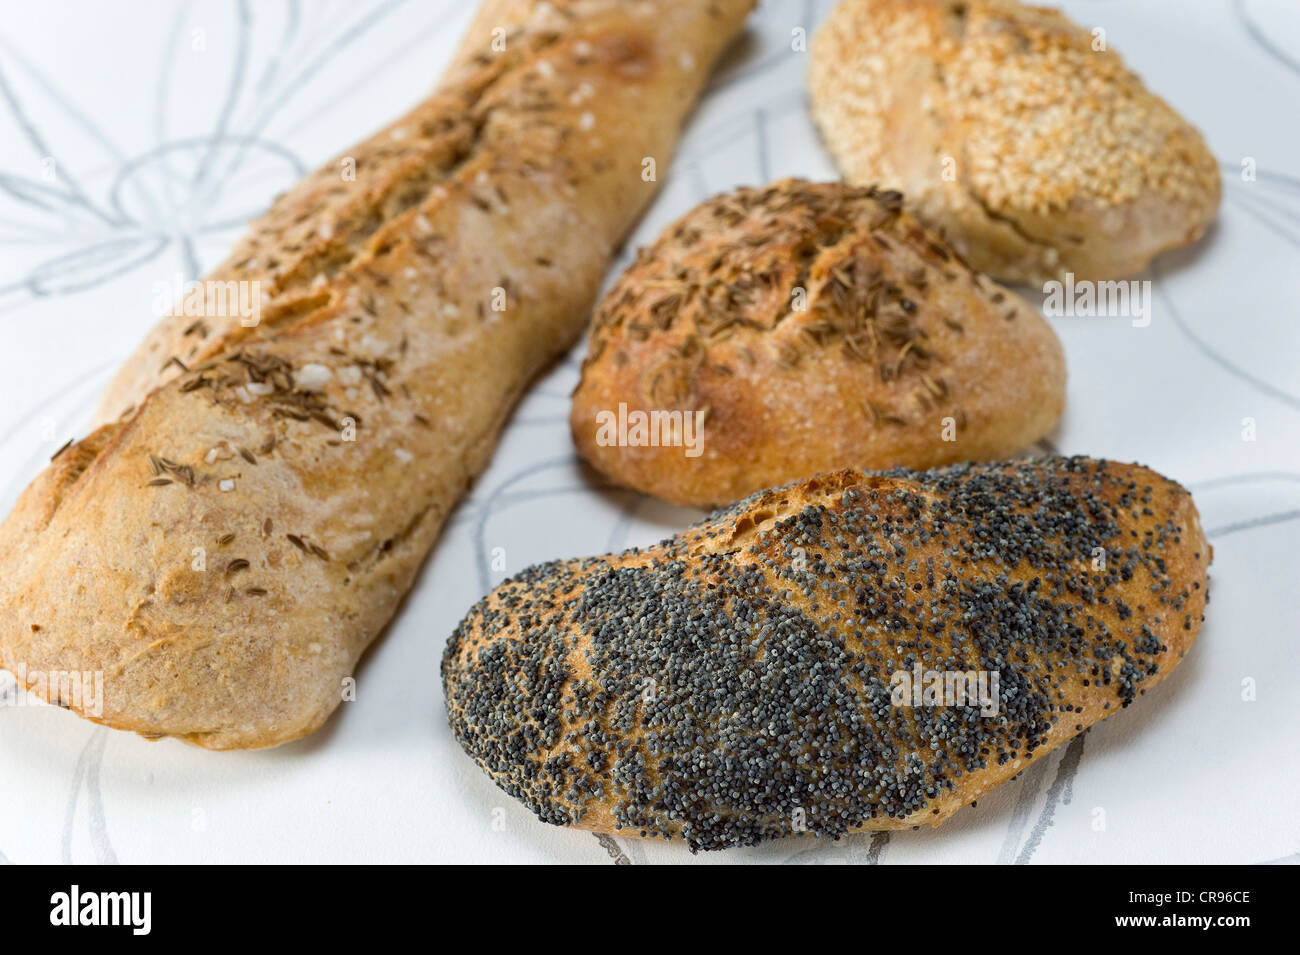 Home-baked bread roll, sesame roll, poppy seed roll, roll with caraway and a Swabian soul, Swabian bread stick Stock Photo